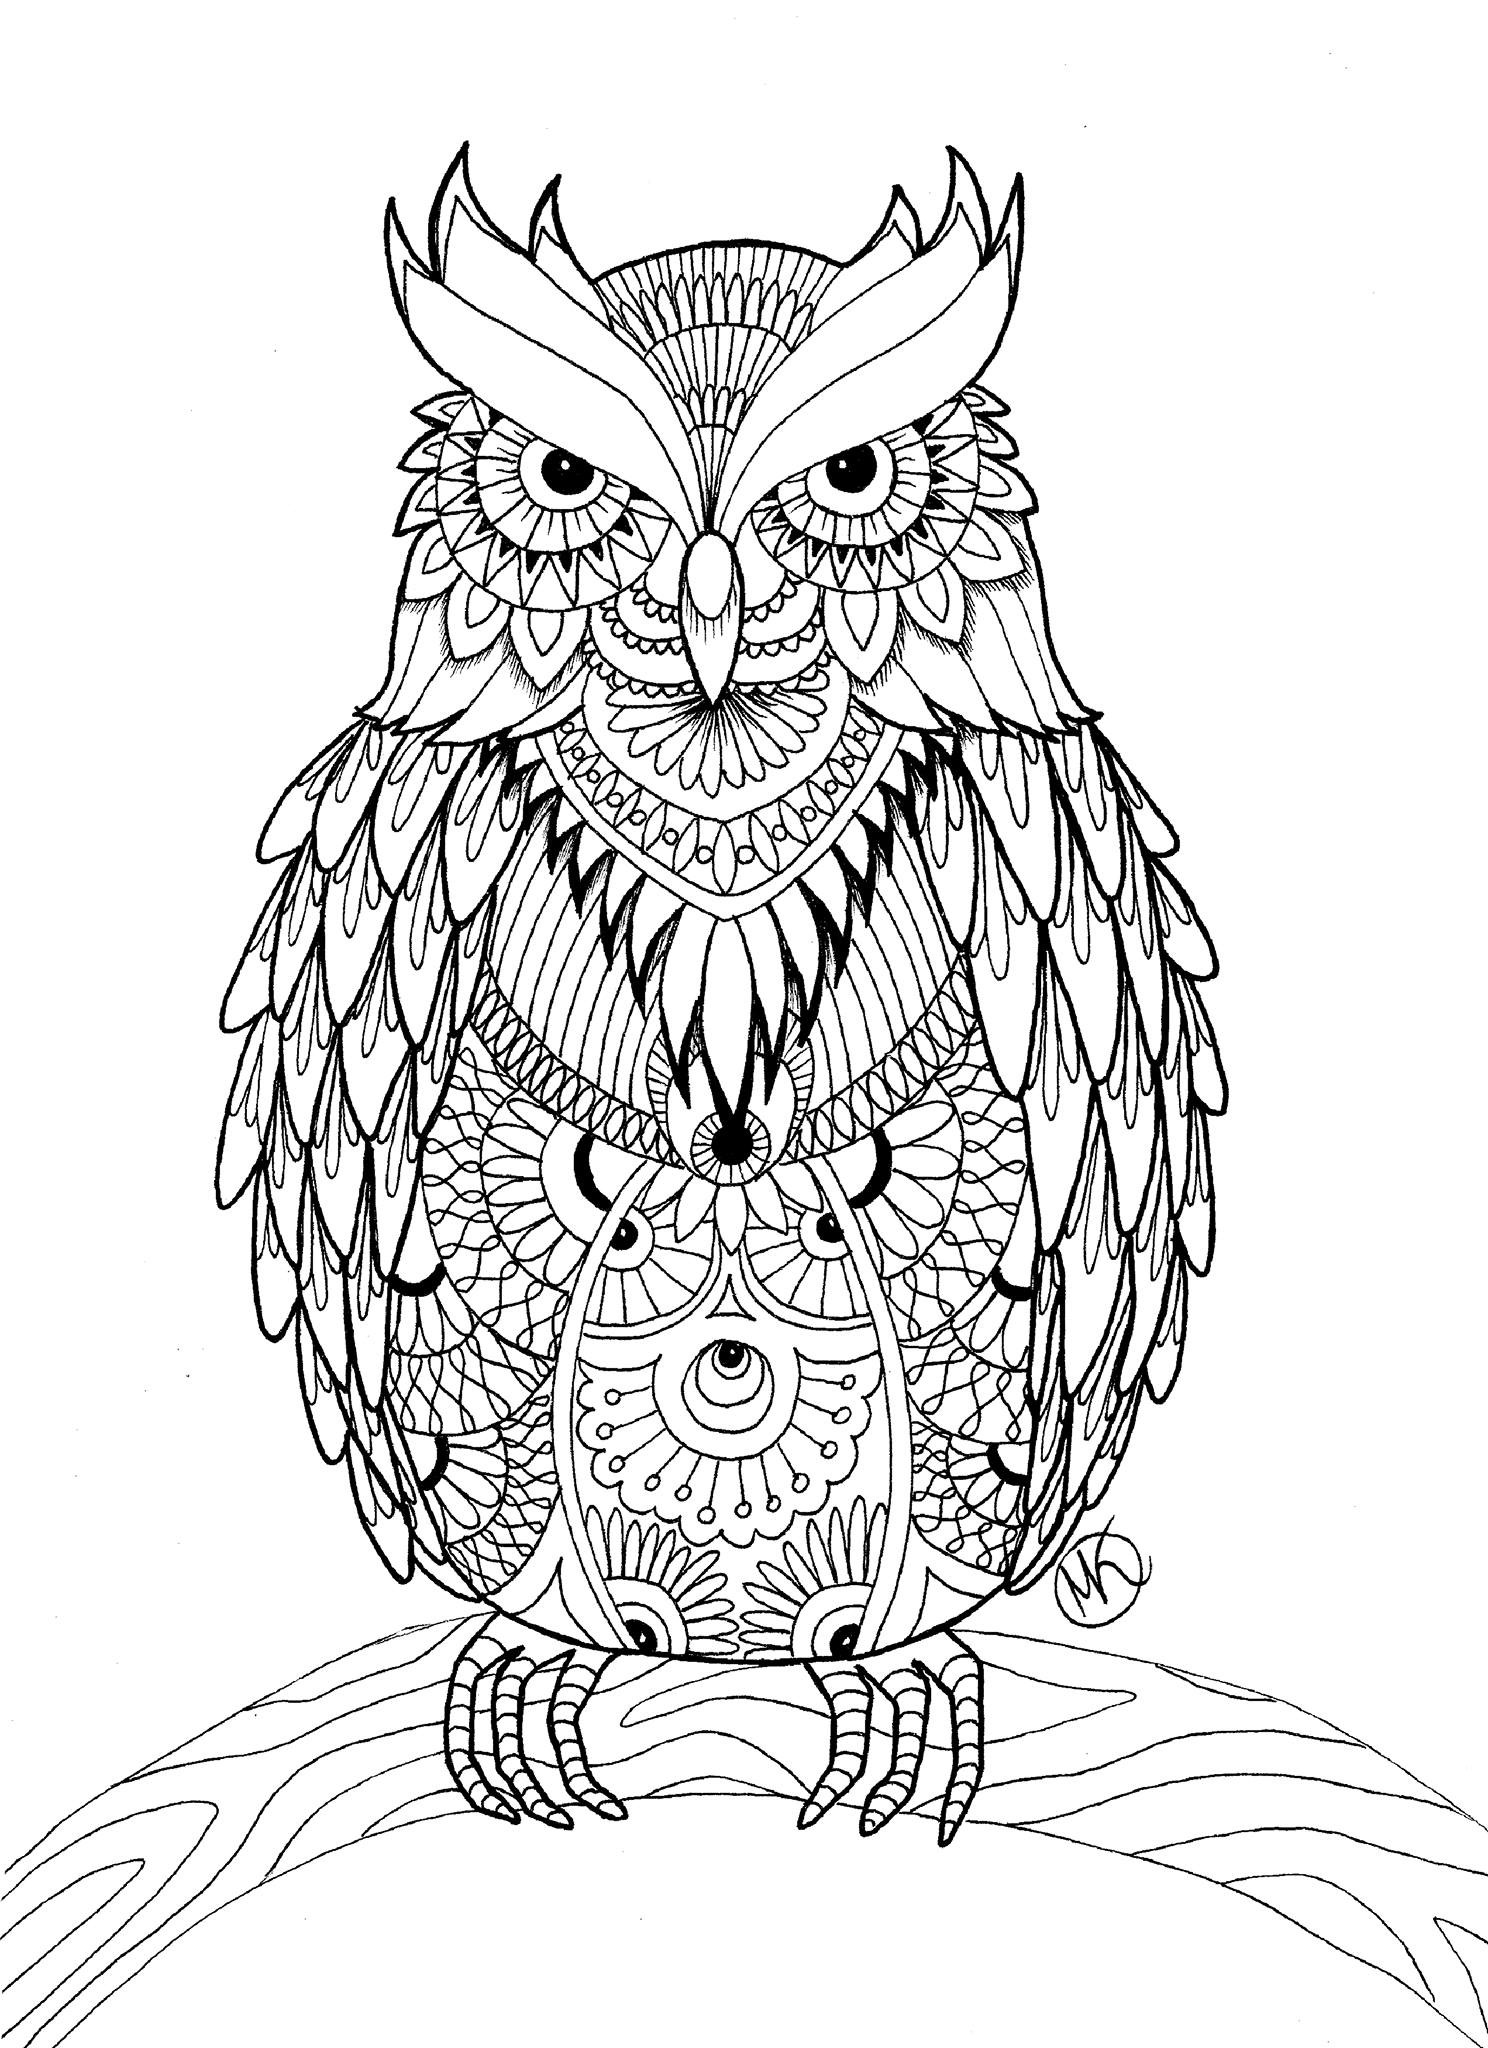 Owl Coloring Pages For Kids
 OWL Coloring Pages for Adults Free Detailed Owl Coloring